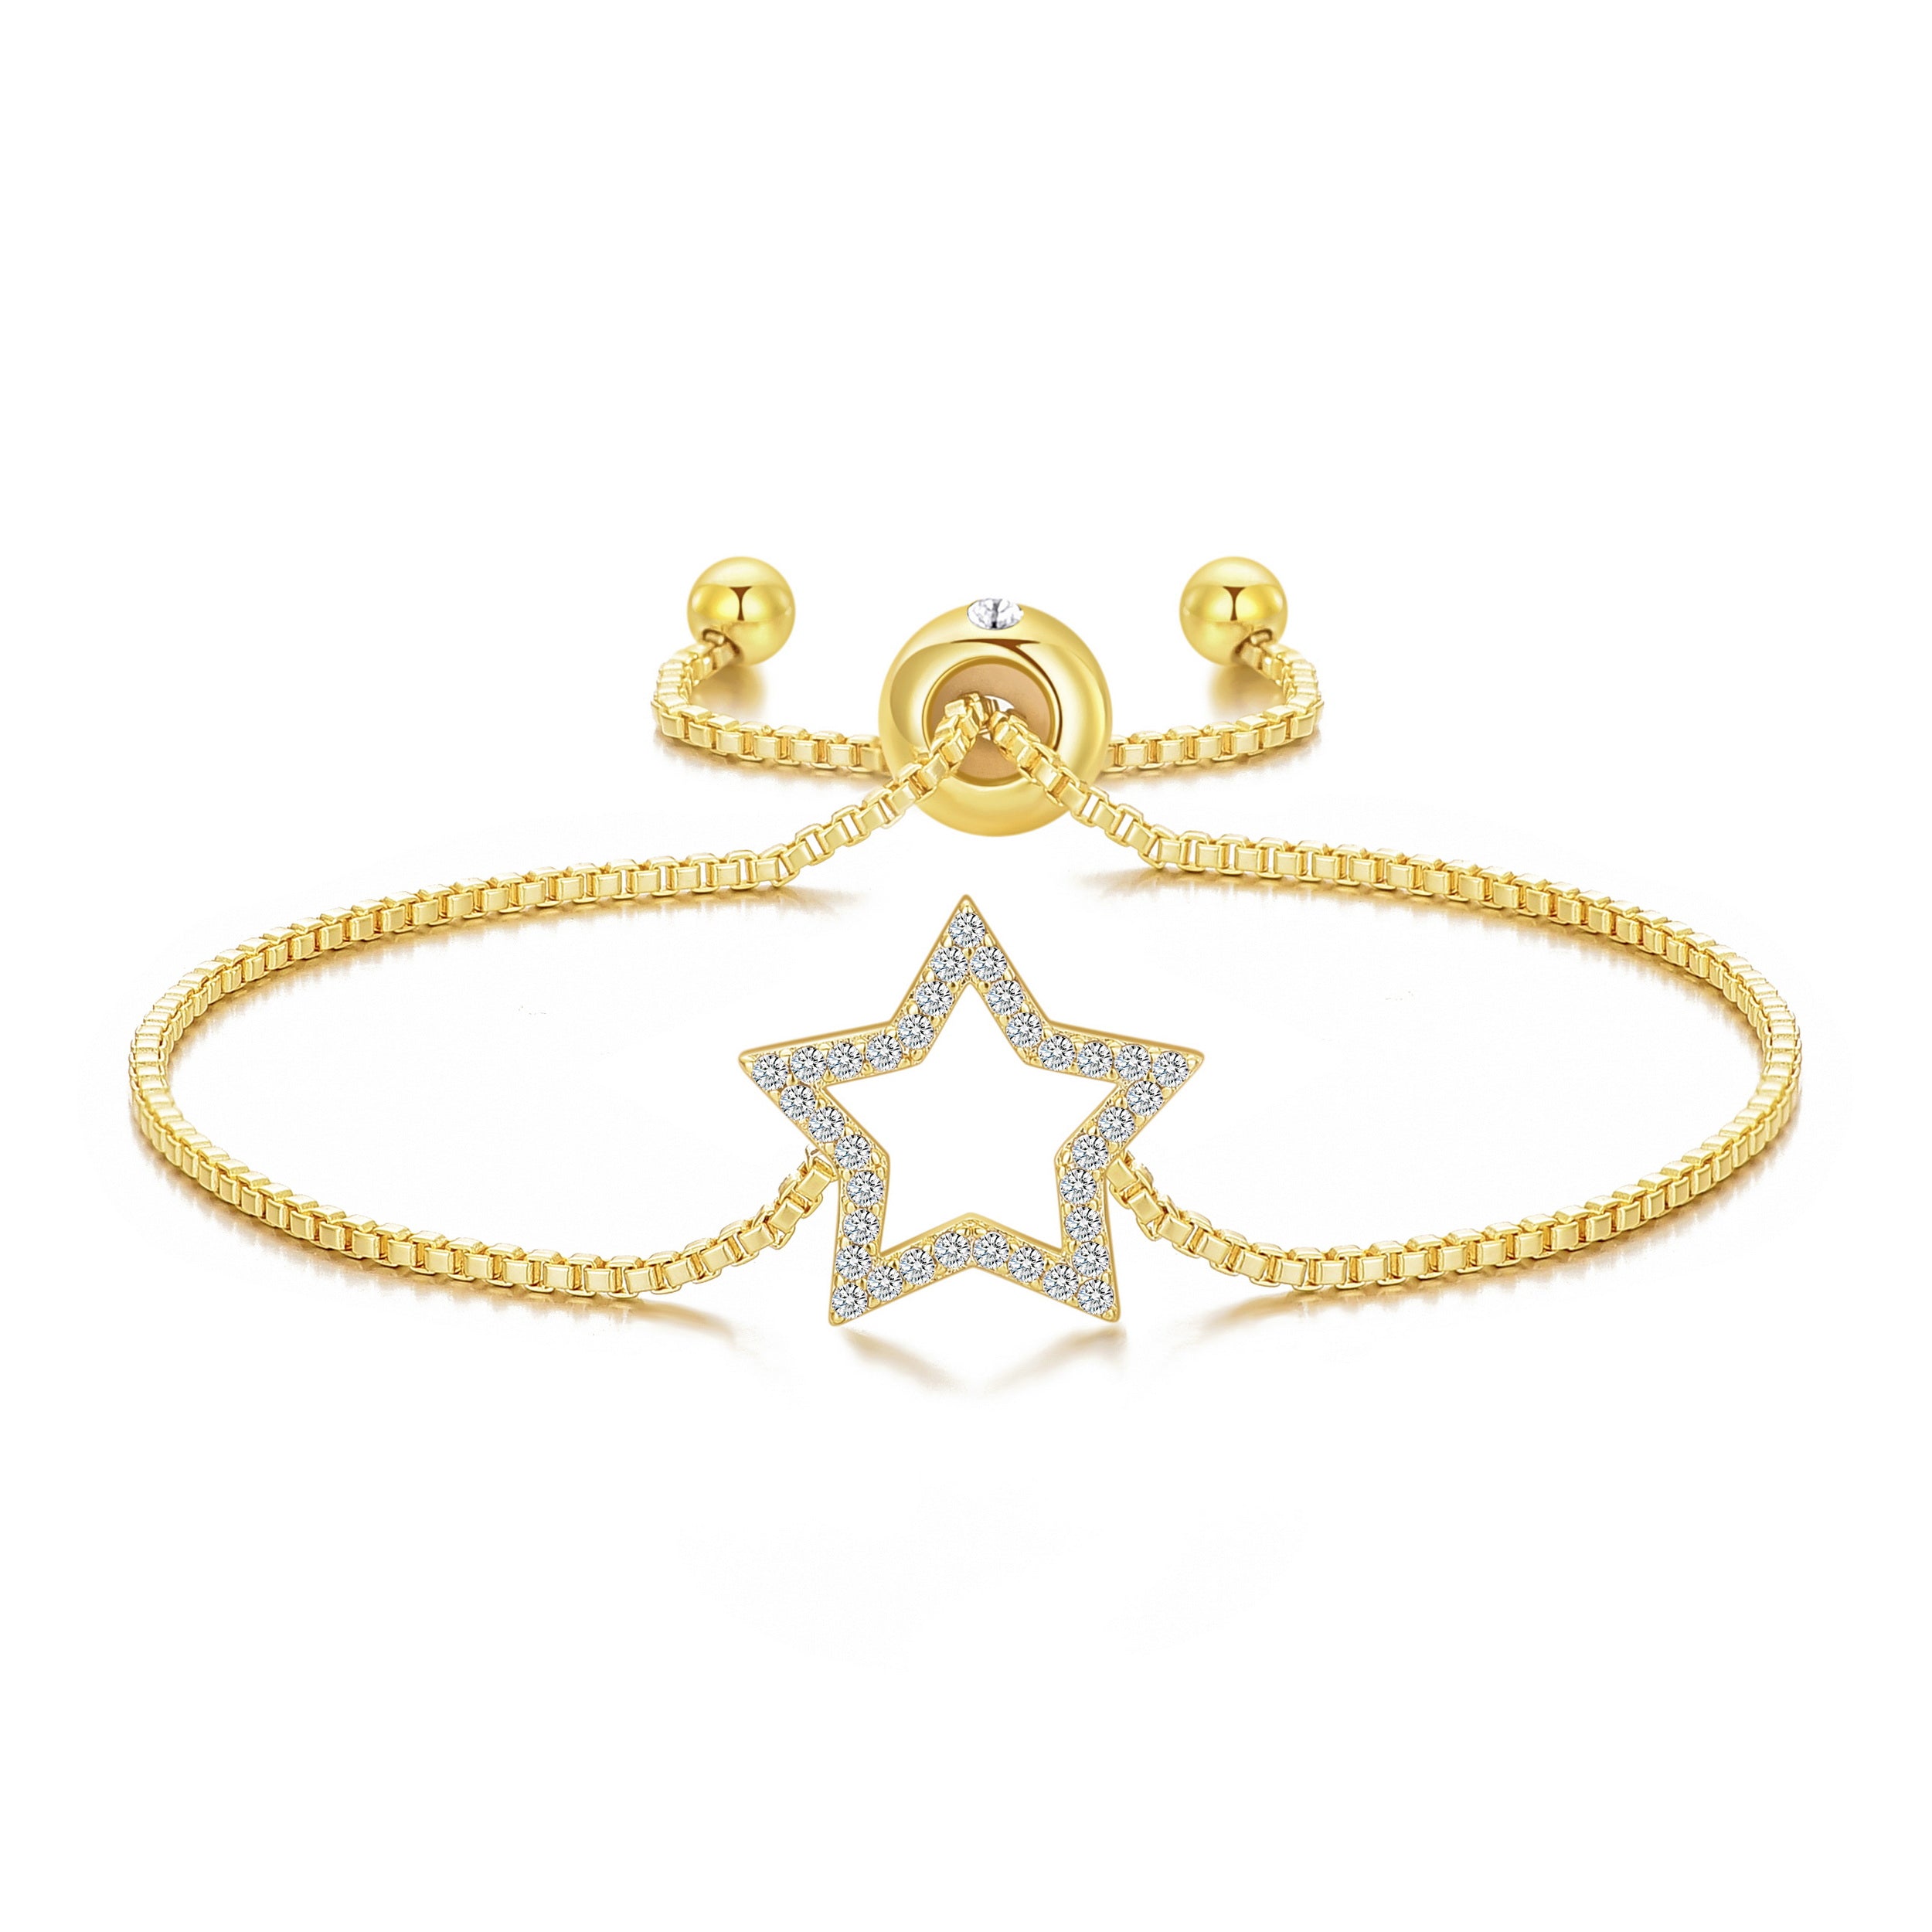 Gold Plated Star Friendship Bracelet Created with Zircondia® Crystals by Philip Jones Jewellery